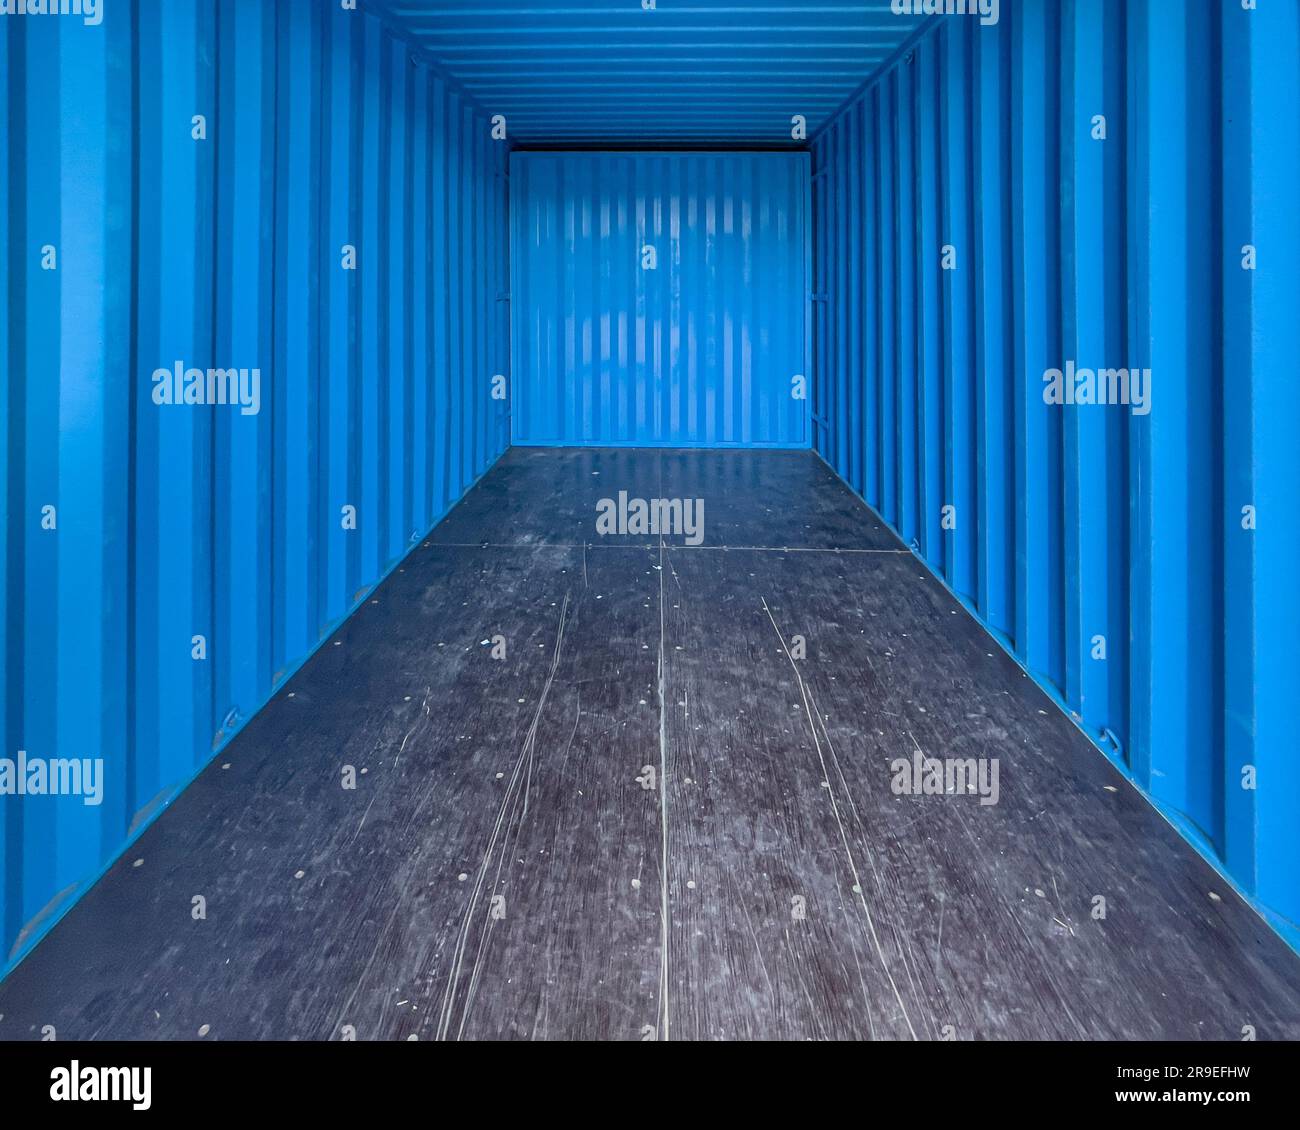 Blue interior of an empty metal shipping container. Shot from the entrance looking inwards Stock Photo